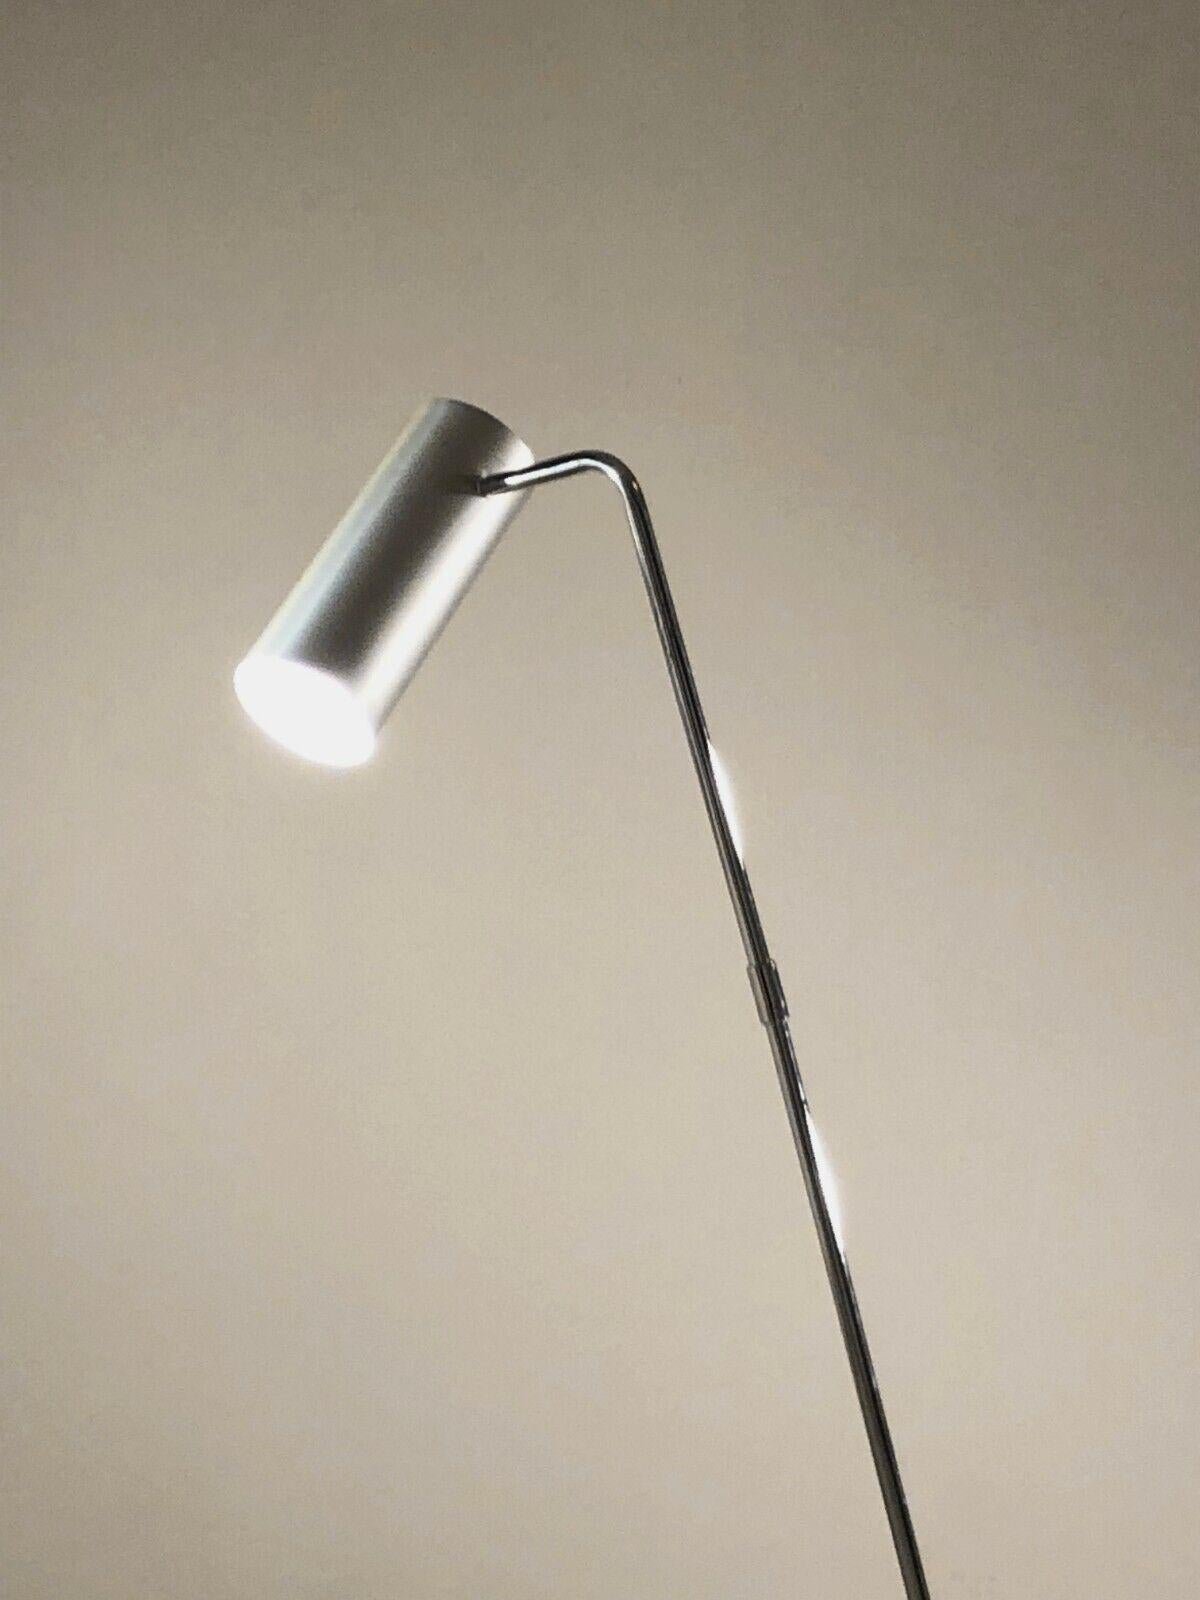 Metal A MINIMAL RADICAL SPACE-AGE FLOOR LAMP by BALTENSWEILER, Swiss 1970